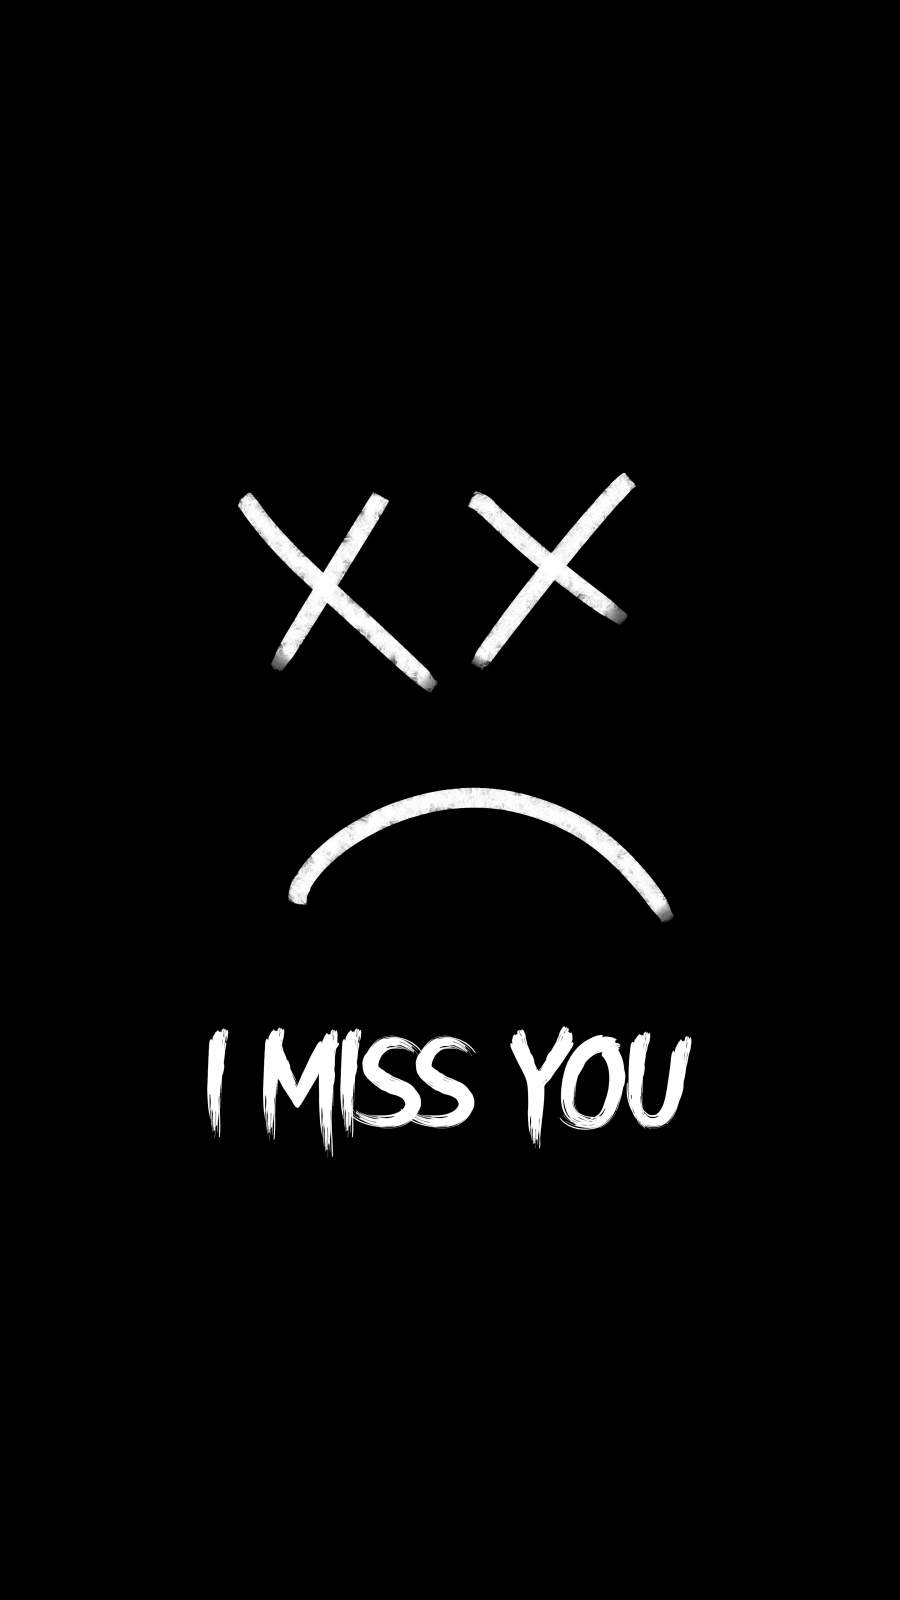 I Miss You - IPhone Wallpapers : iPhone Wallpapers